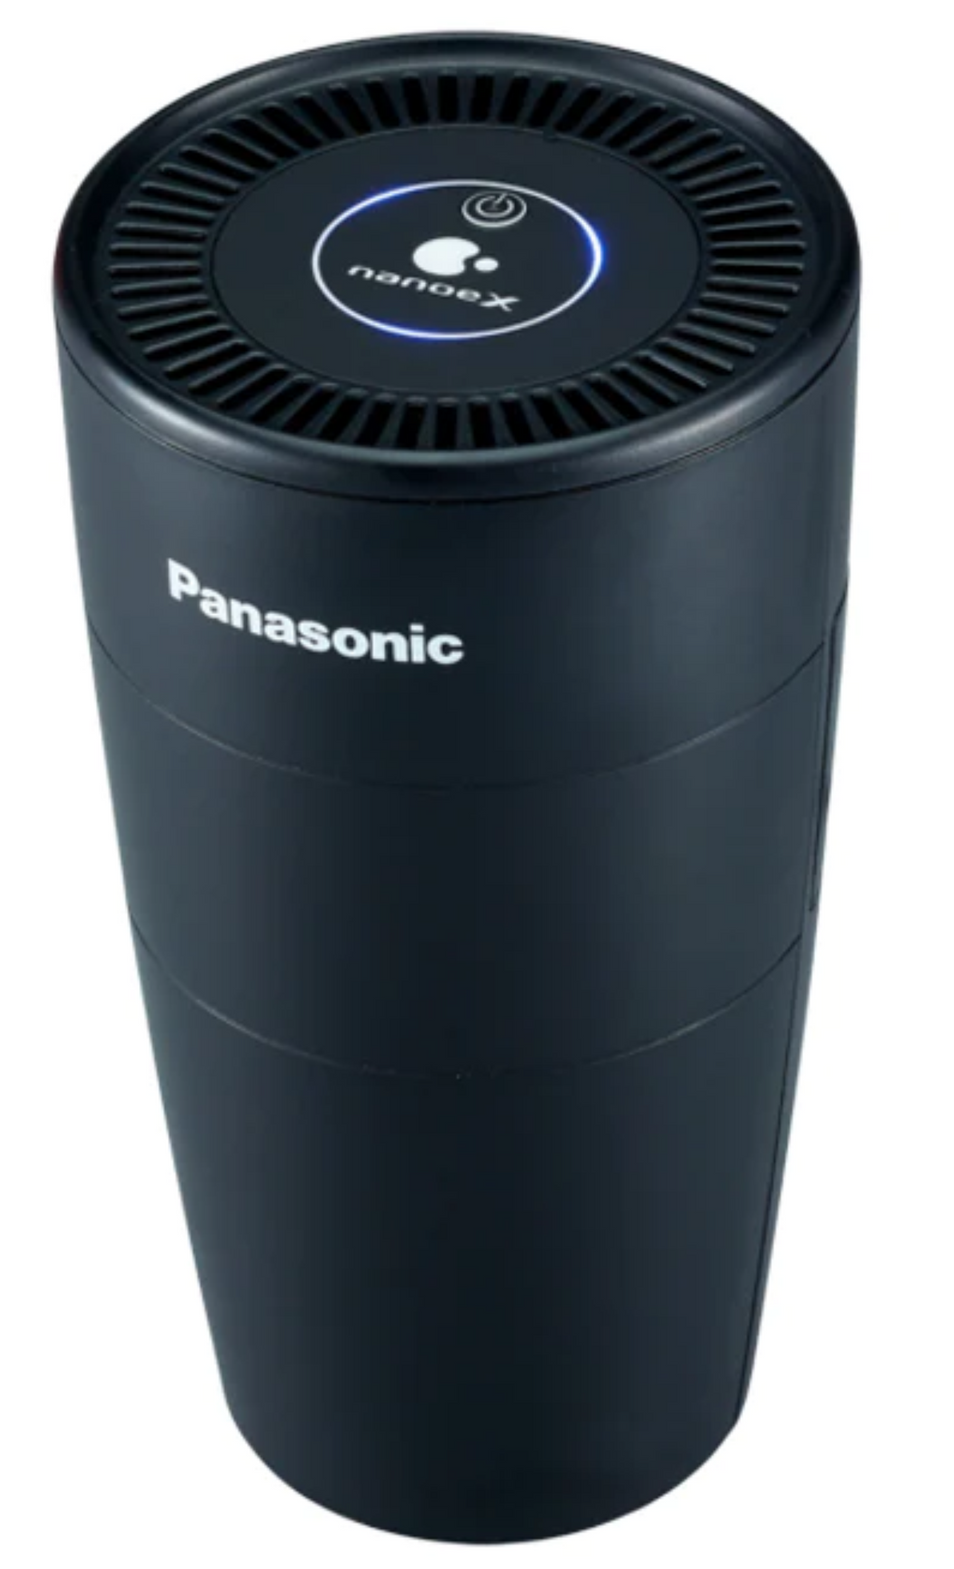 a black panasonic air purifier on a white background